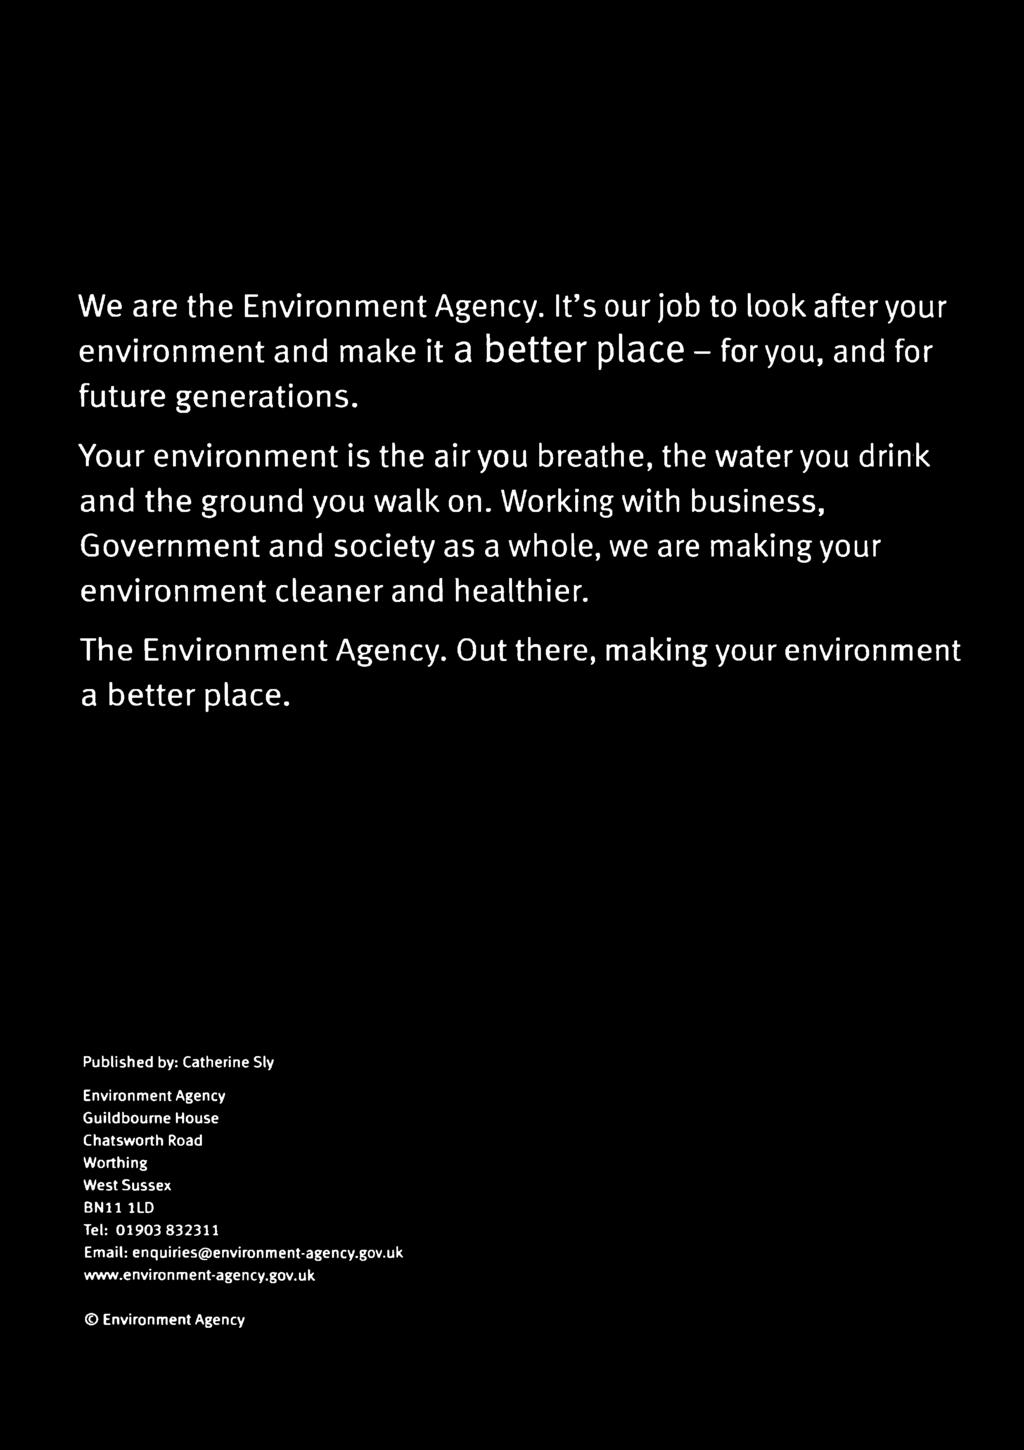 healthier. The Environment Agency. Out there, making your environment a better place.